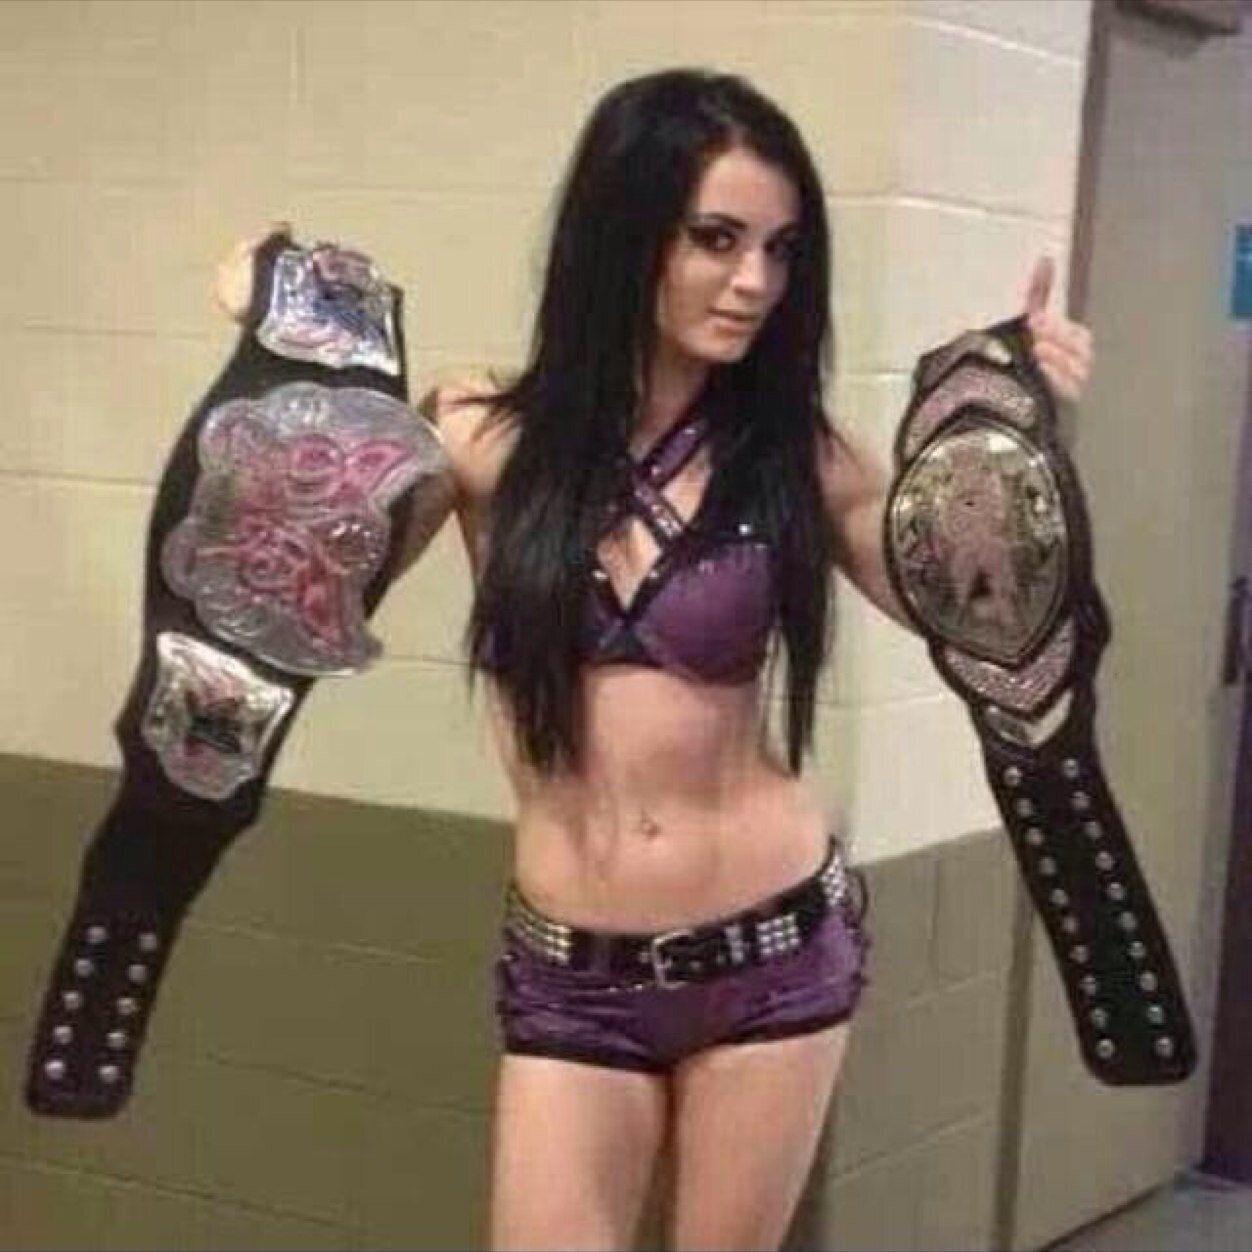 Massive WWE Diva fan :) I want wait for an epic AJ vs Paige feud its gona be freaking epic just like the good old days 3 Normally watch it all online so yeah!